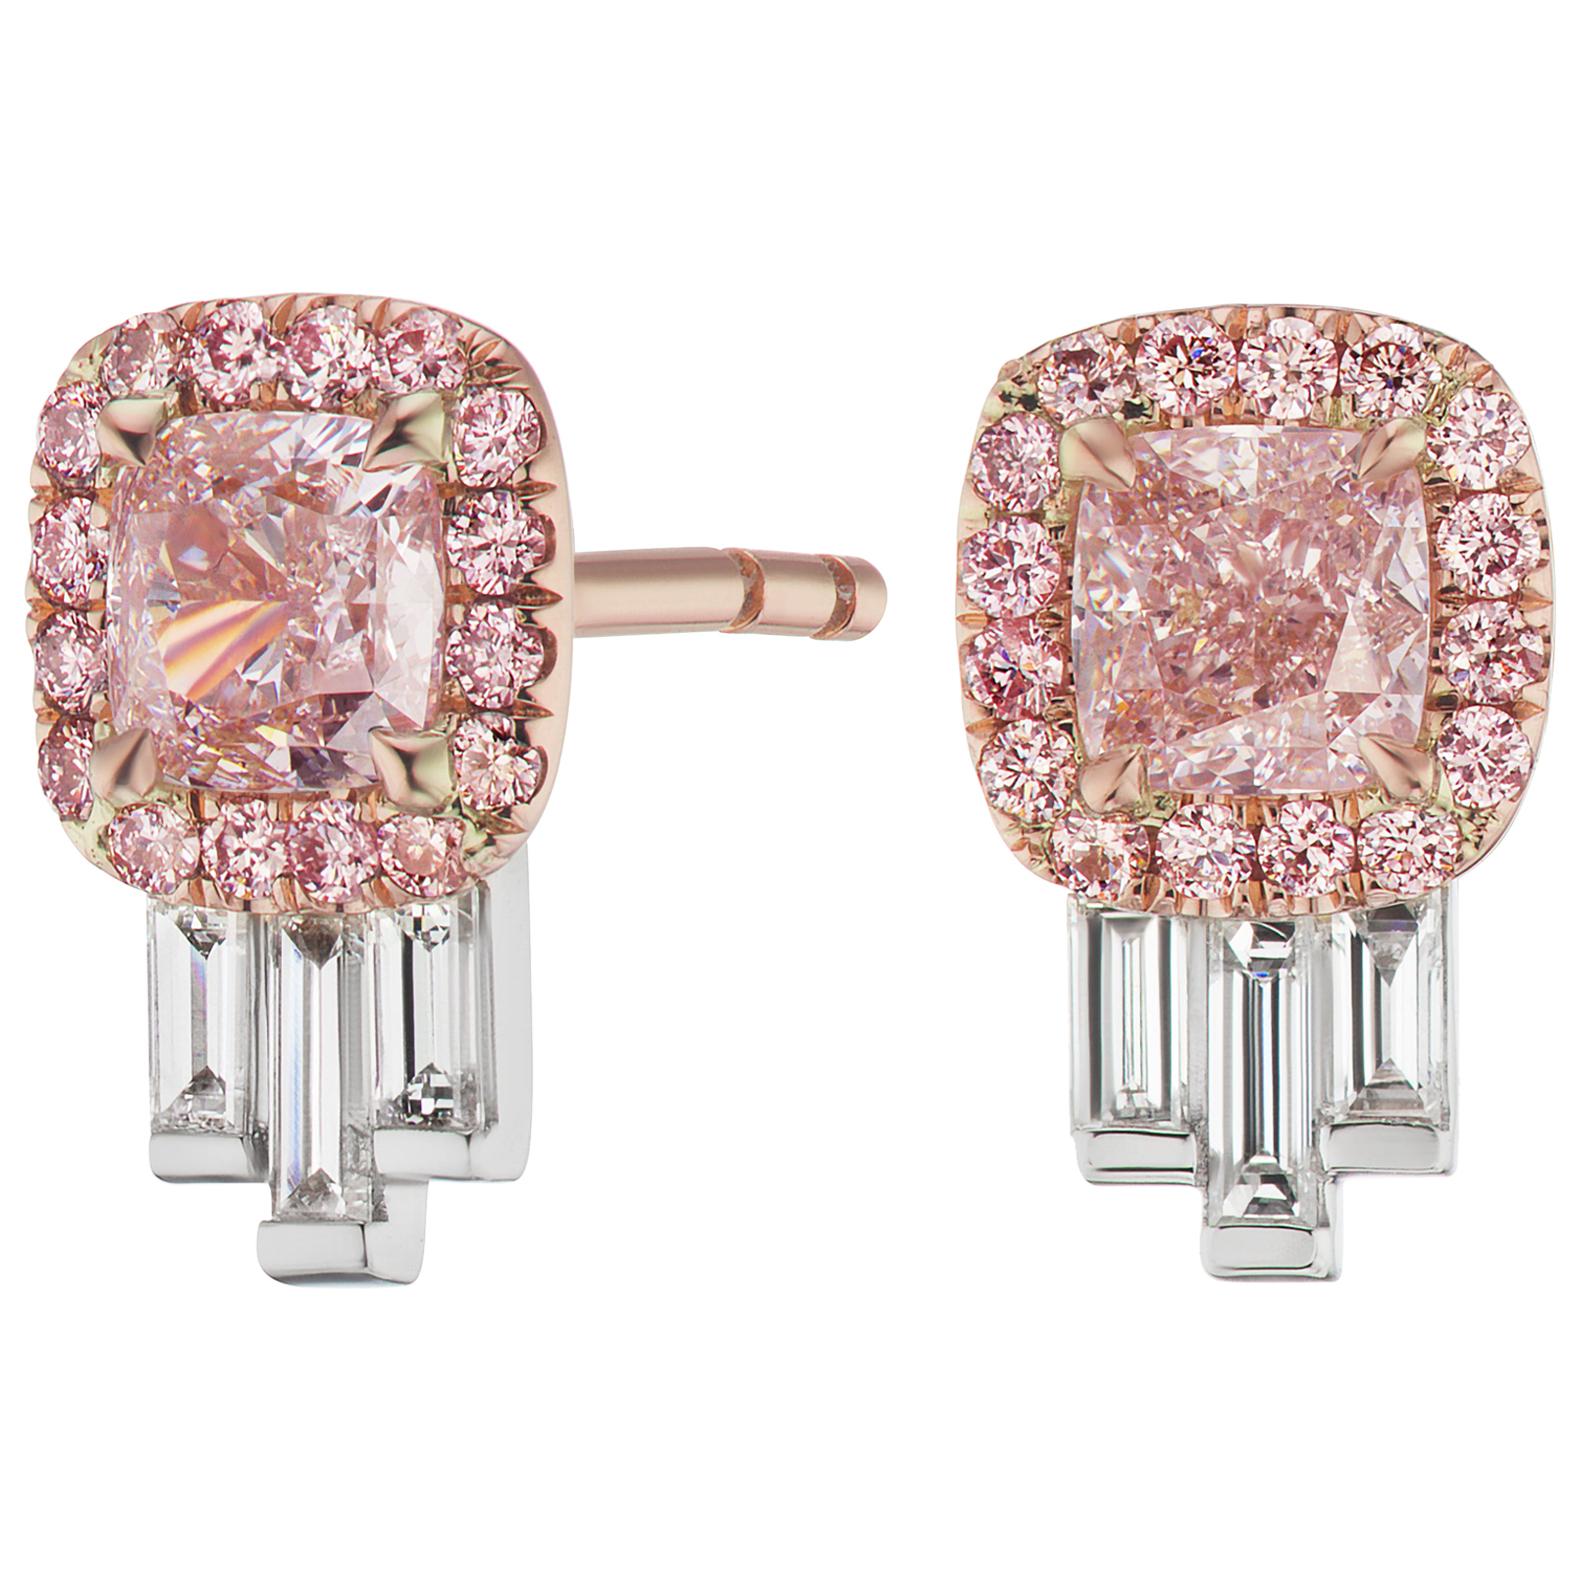 Aggregate more than 79 pink diamond earrings for sale latest ...